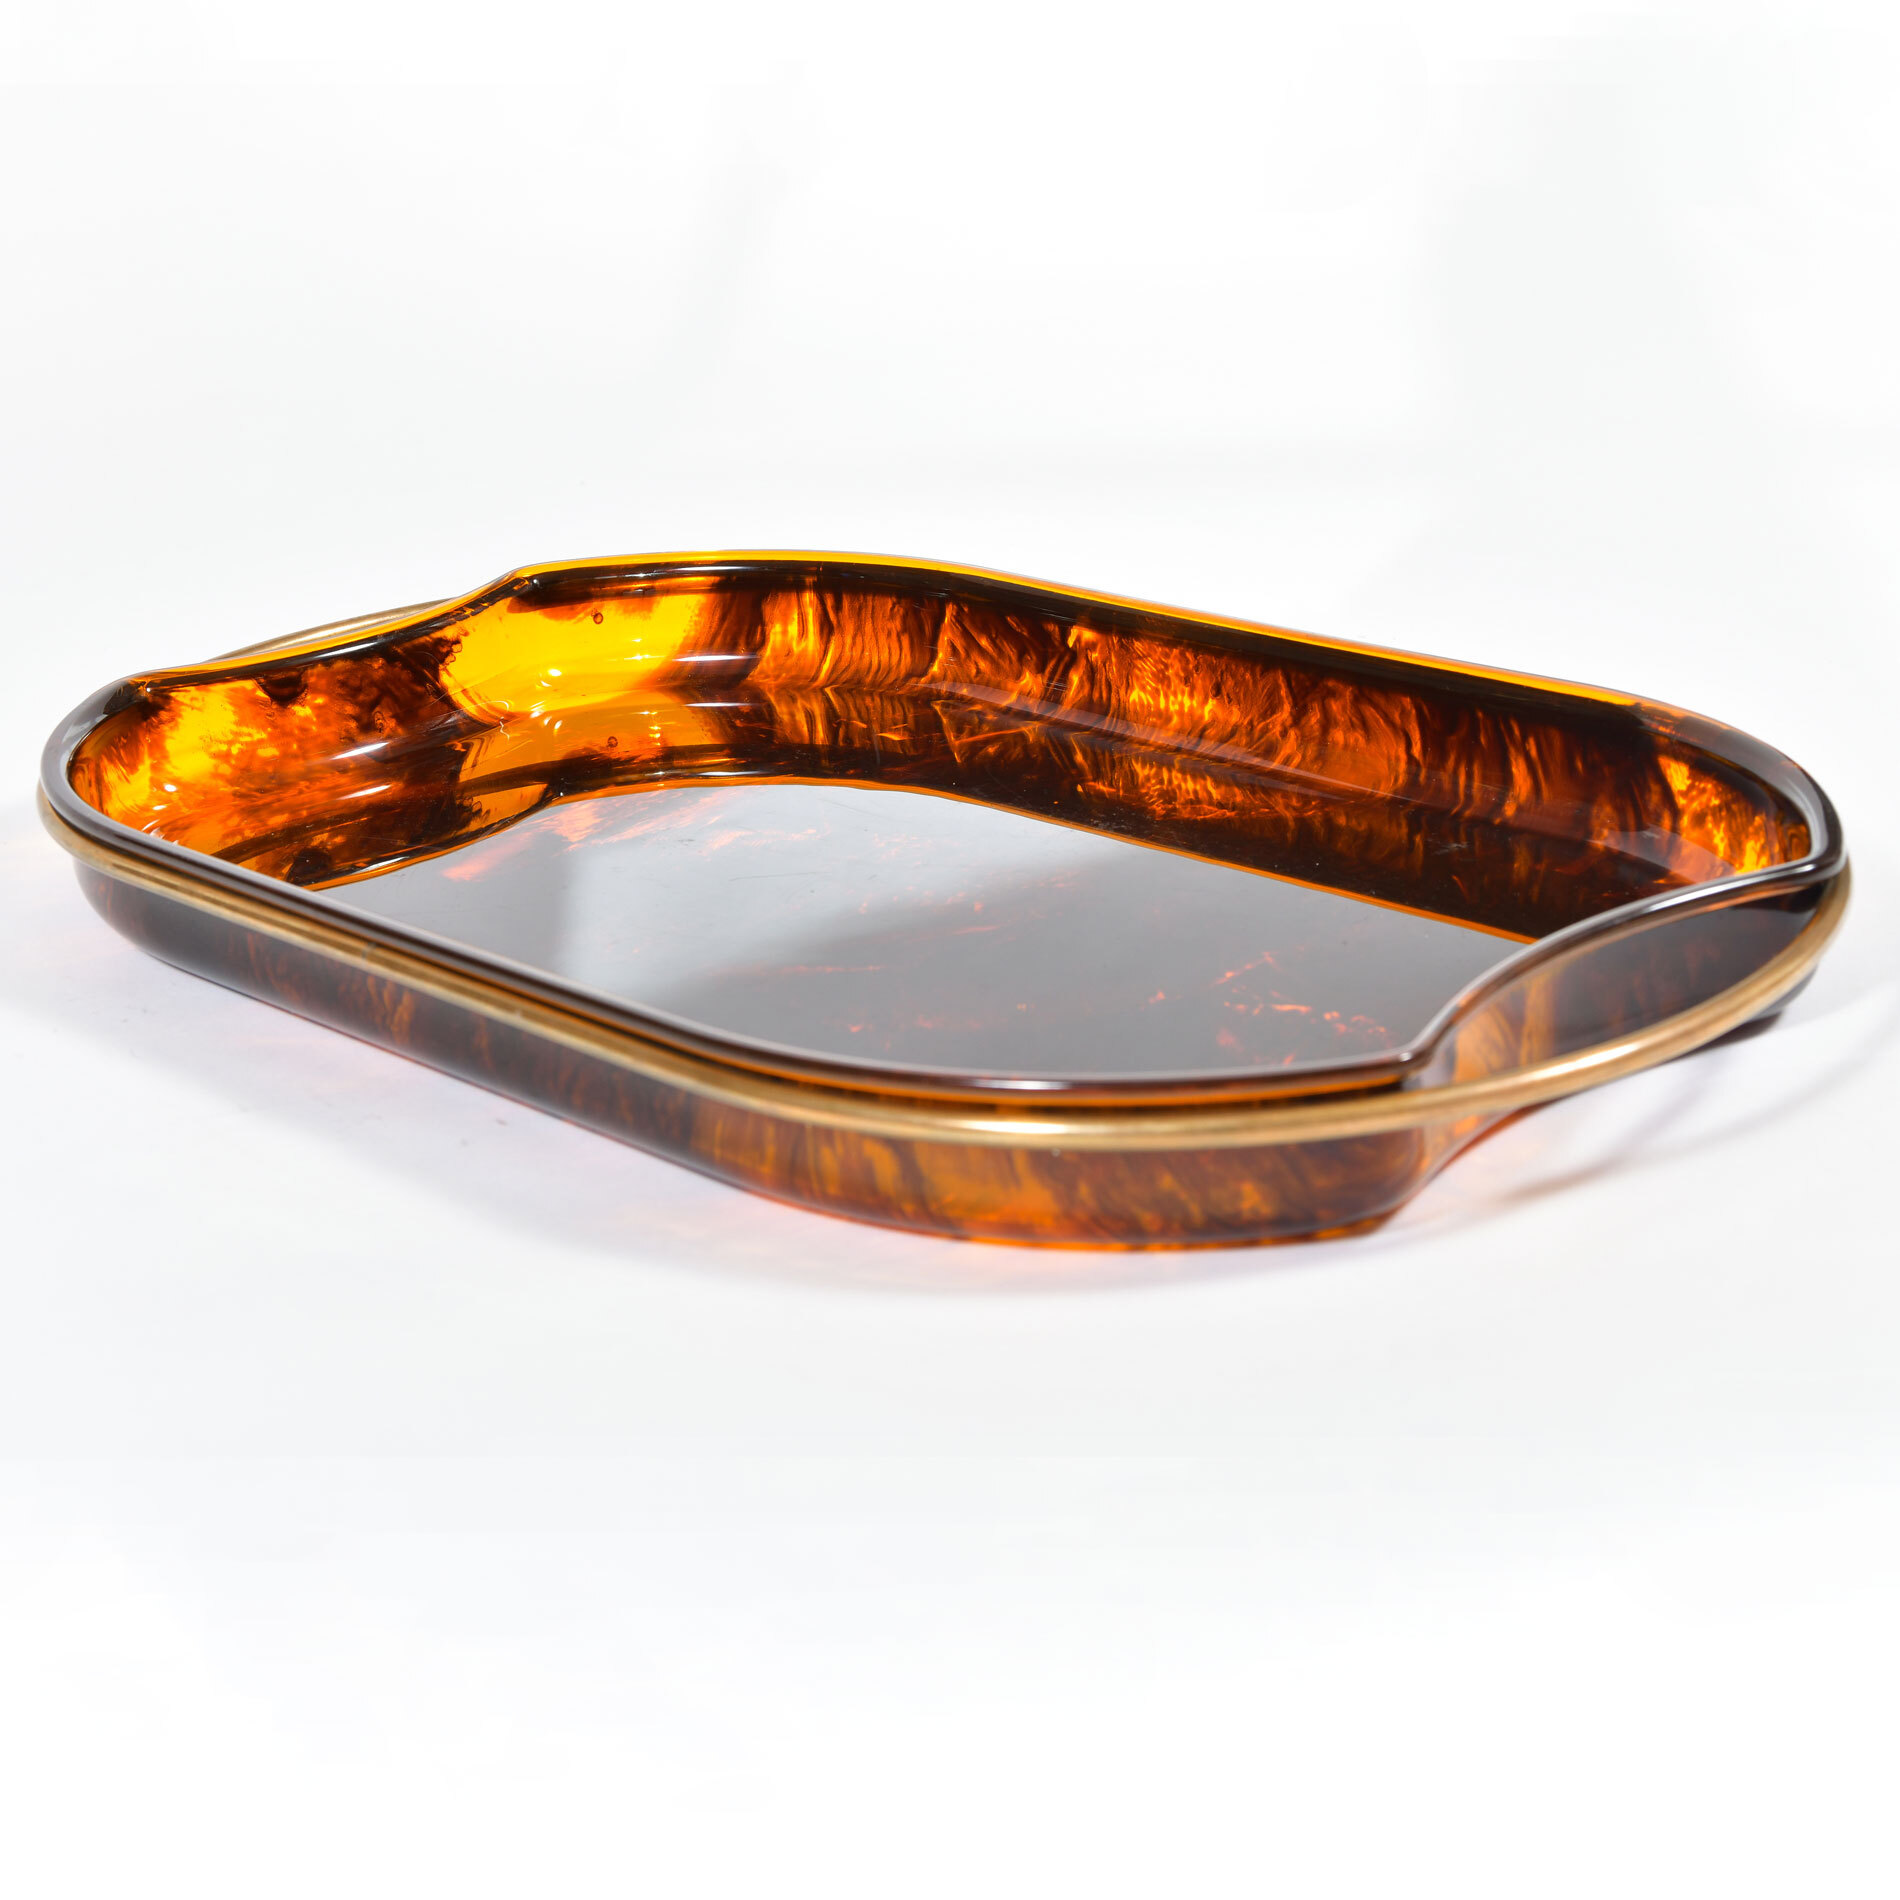 The image for Faux Tortoise Shell Tray 01